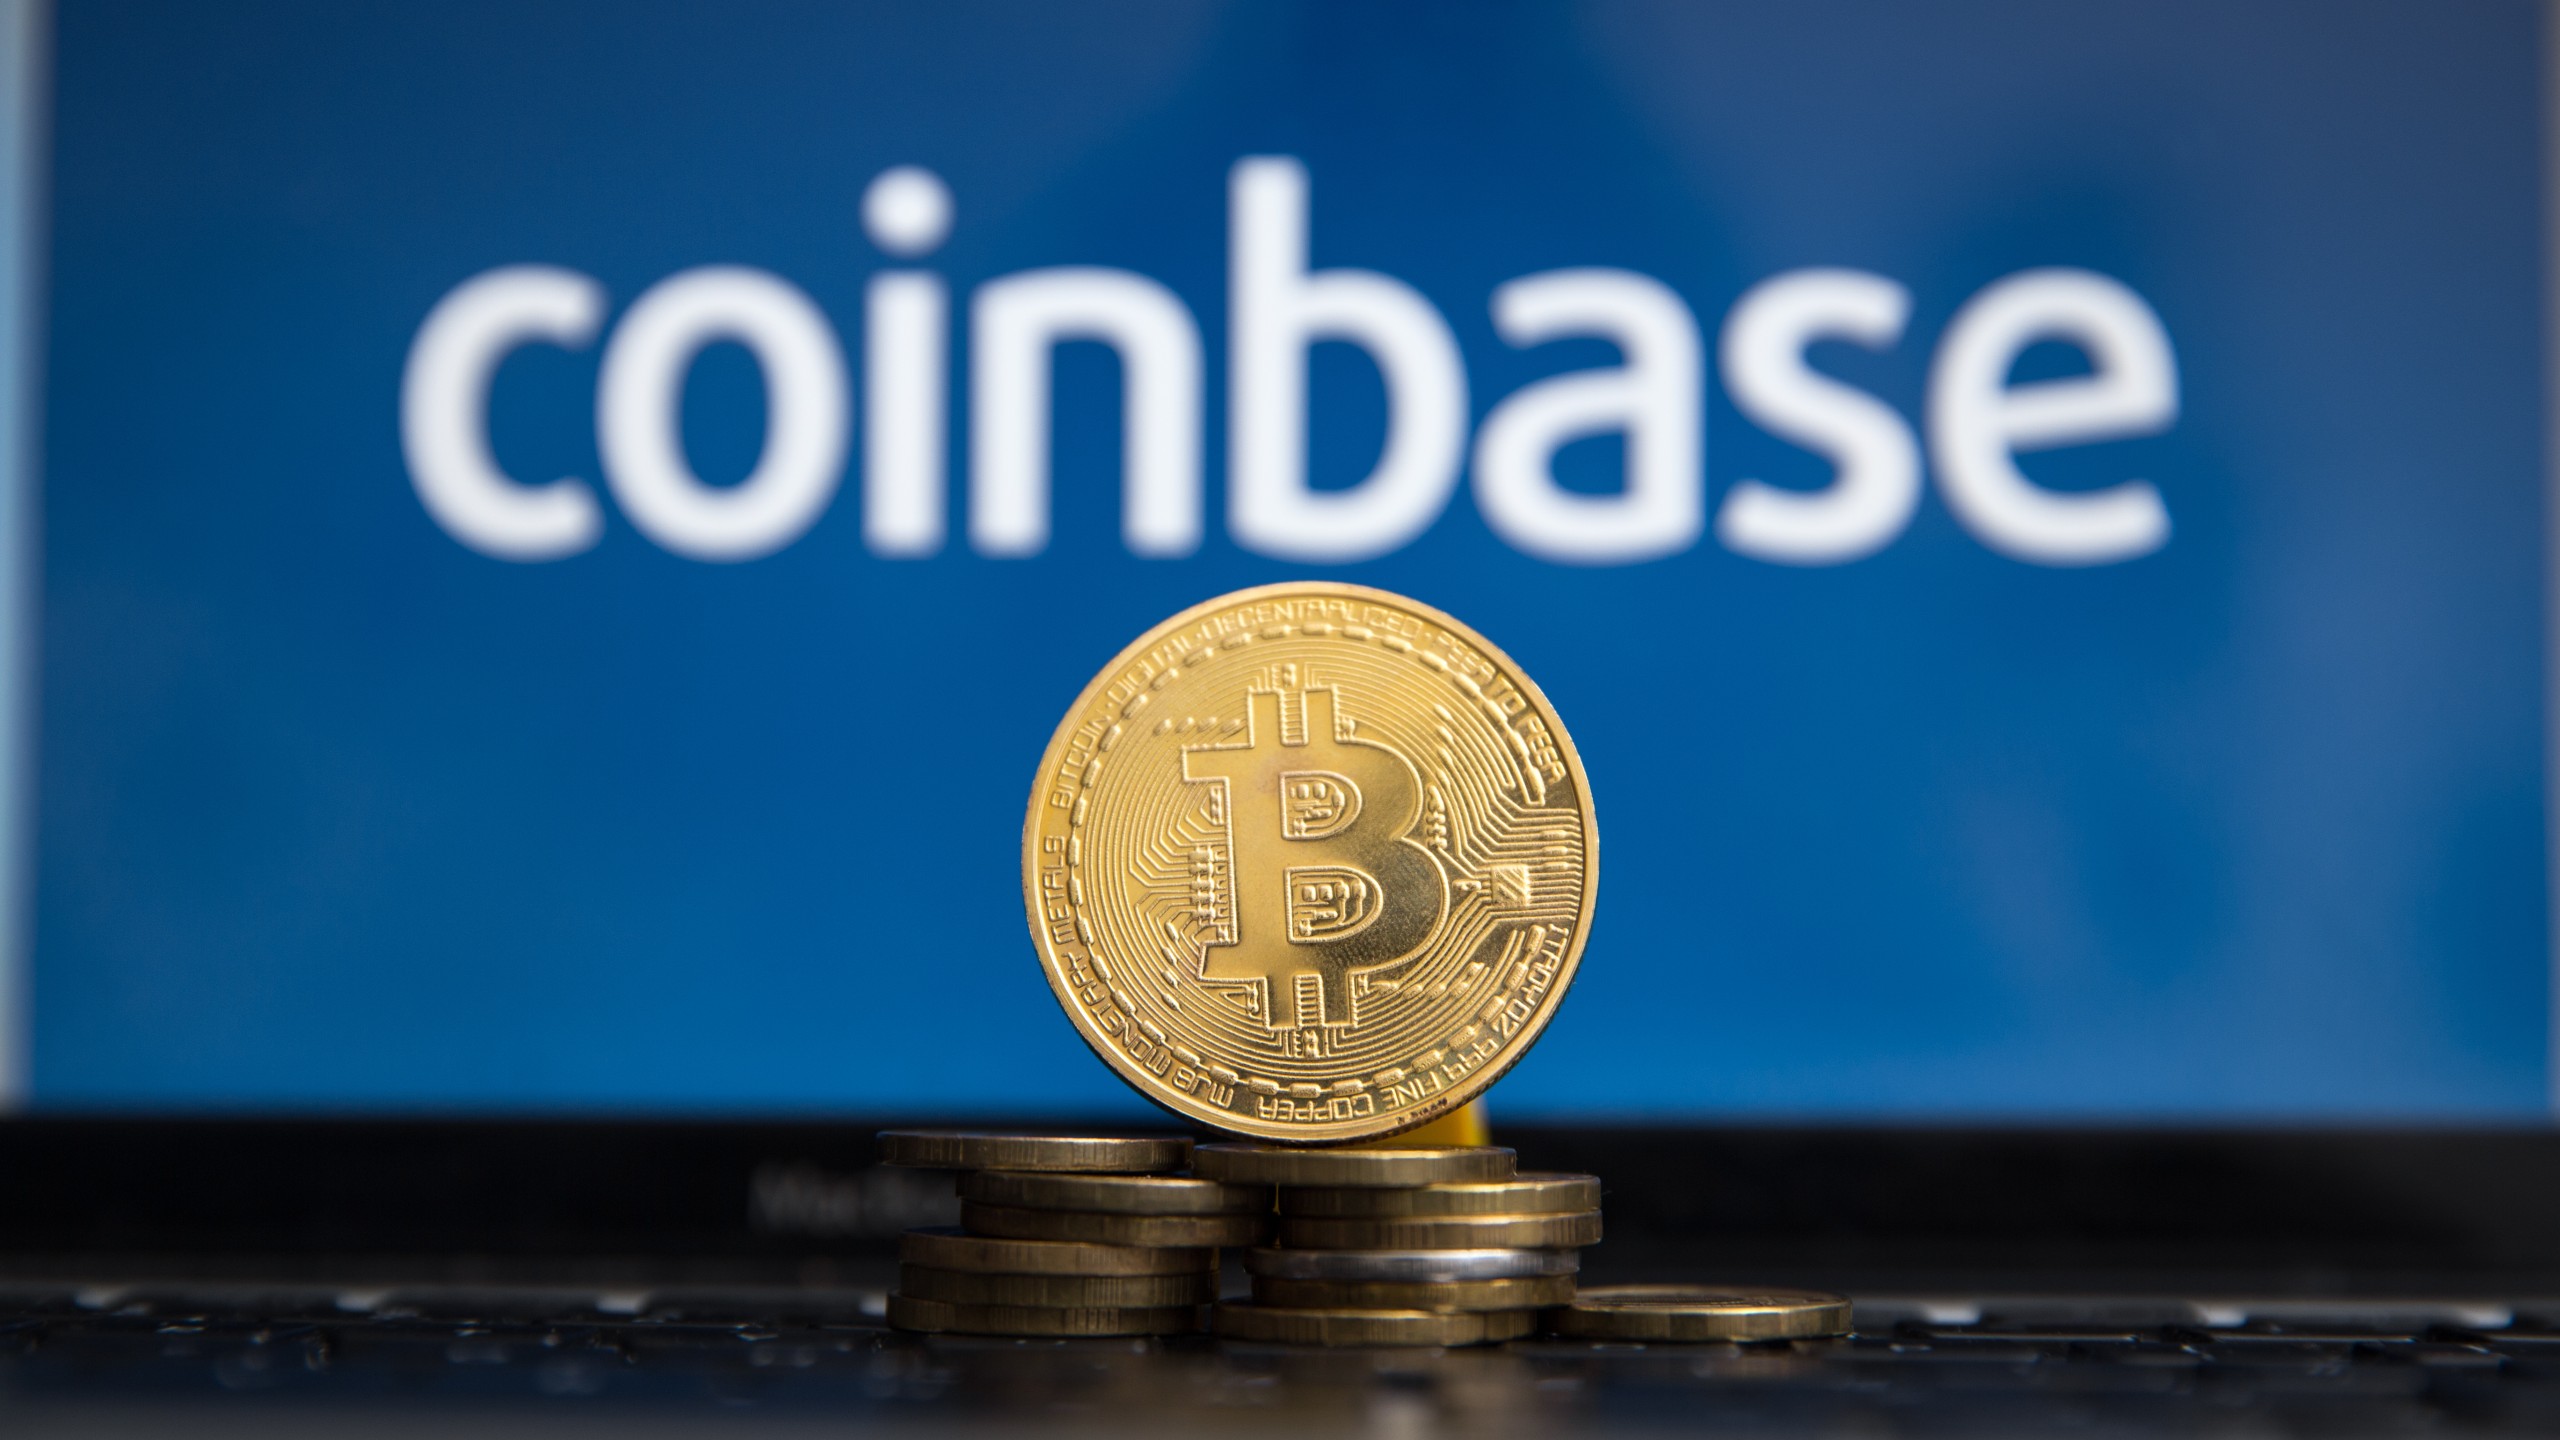 Coinbase Stocks Soar as Cathie Wood's Investment Firm Cashes In